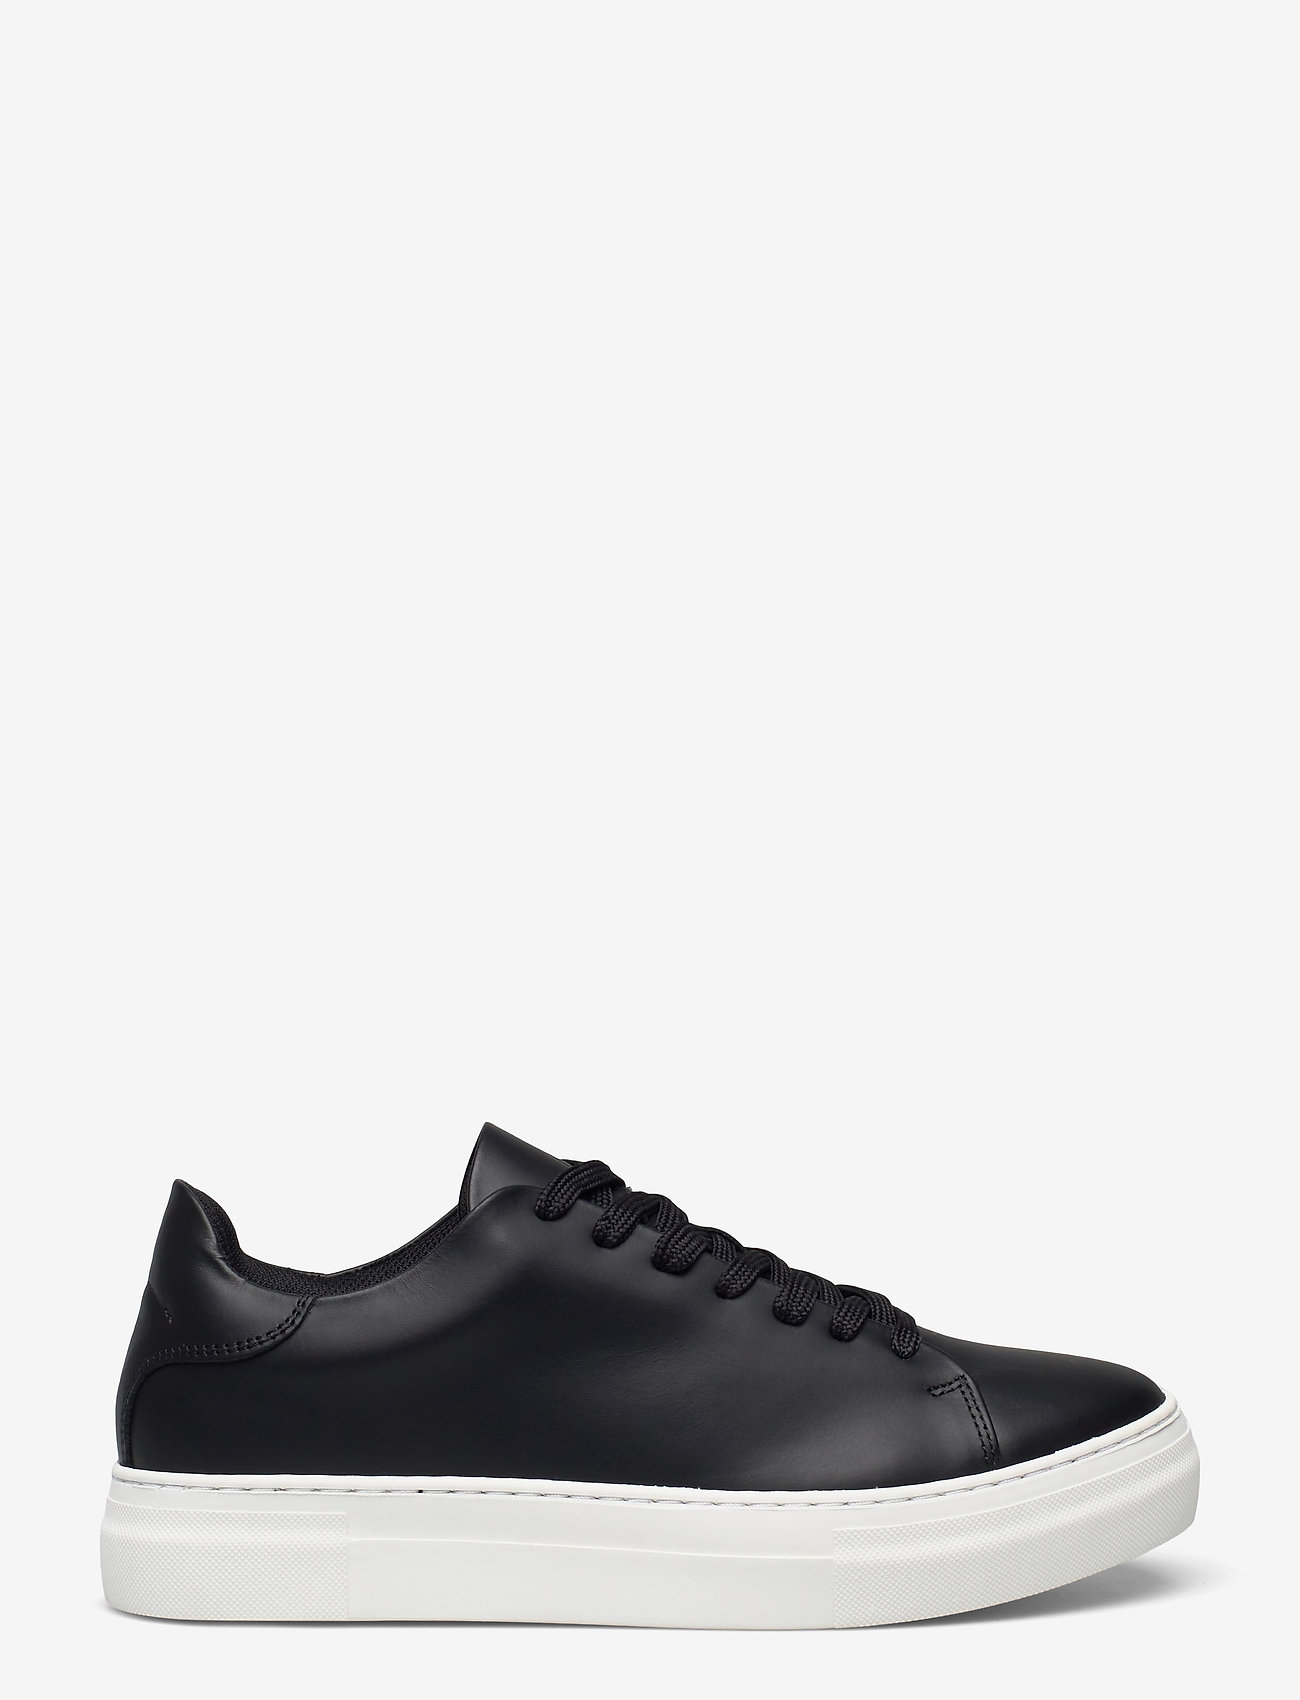 Selected Homme - SLHDAVID CHUNKY LEATHER SNEAKER NOOS O - low tops - black - 1